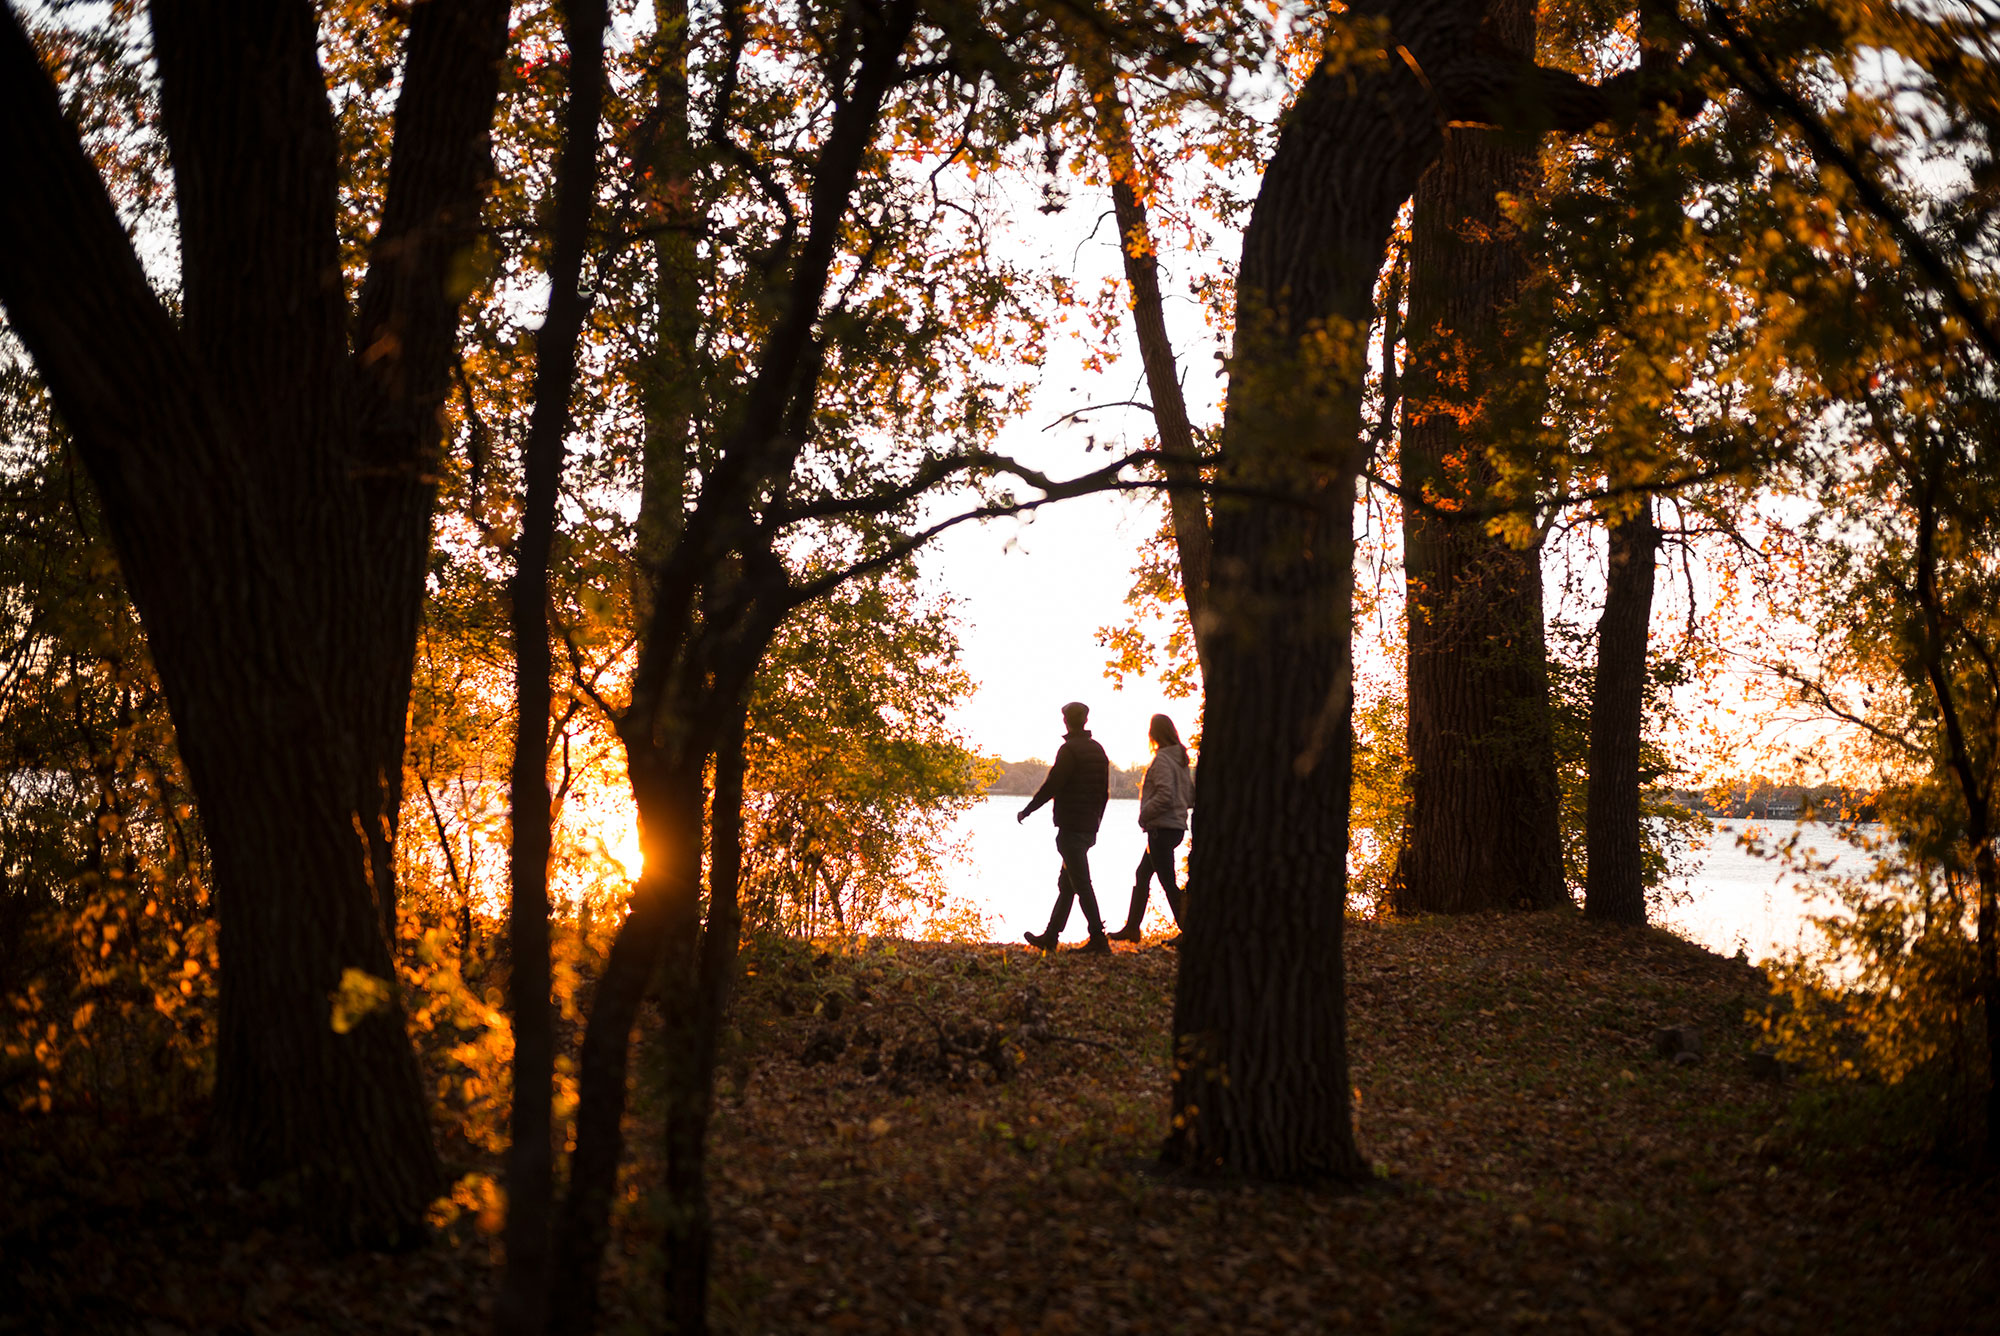 A couple walking through the woods at sunset.